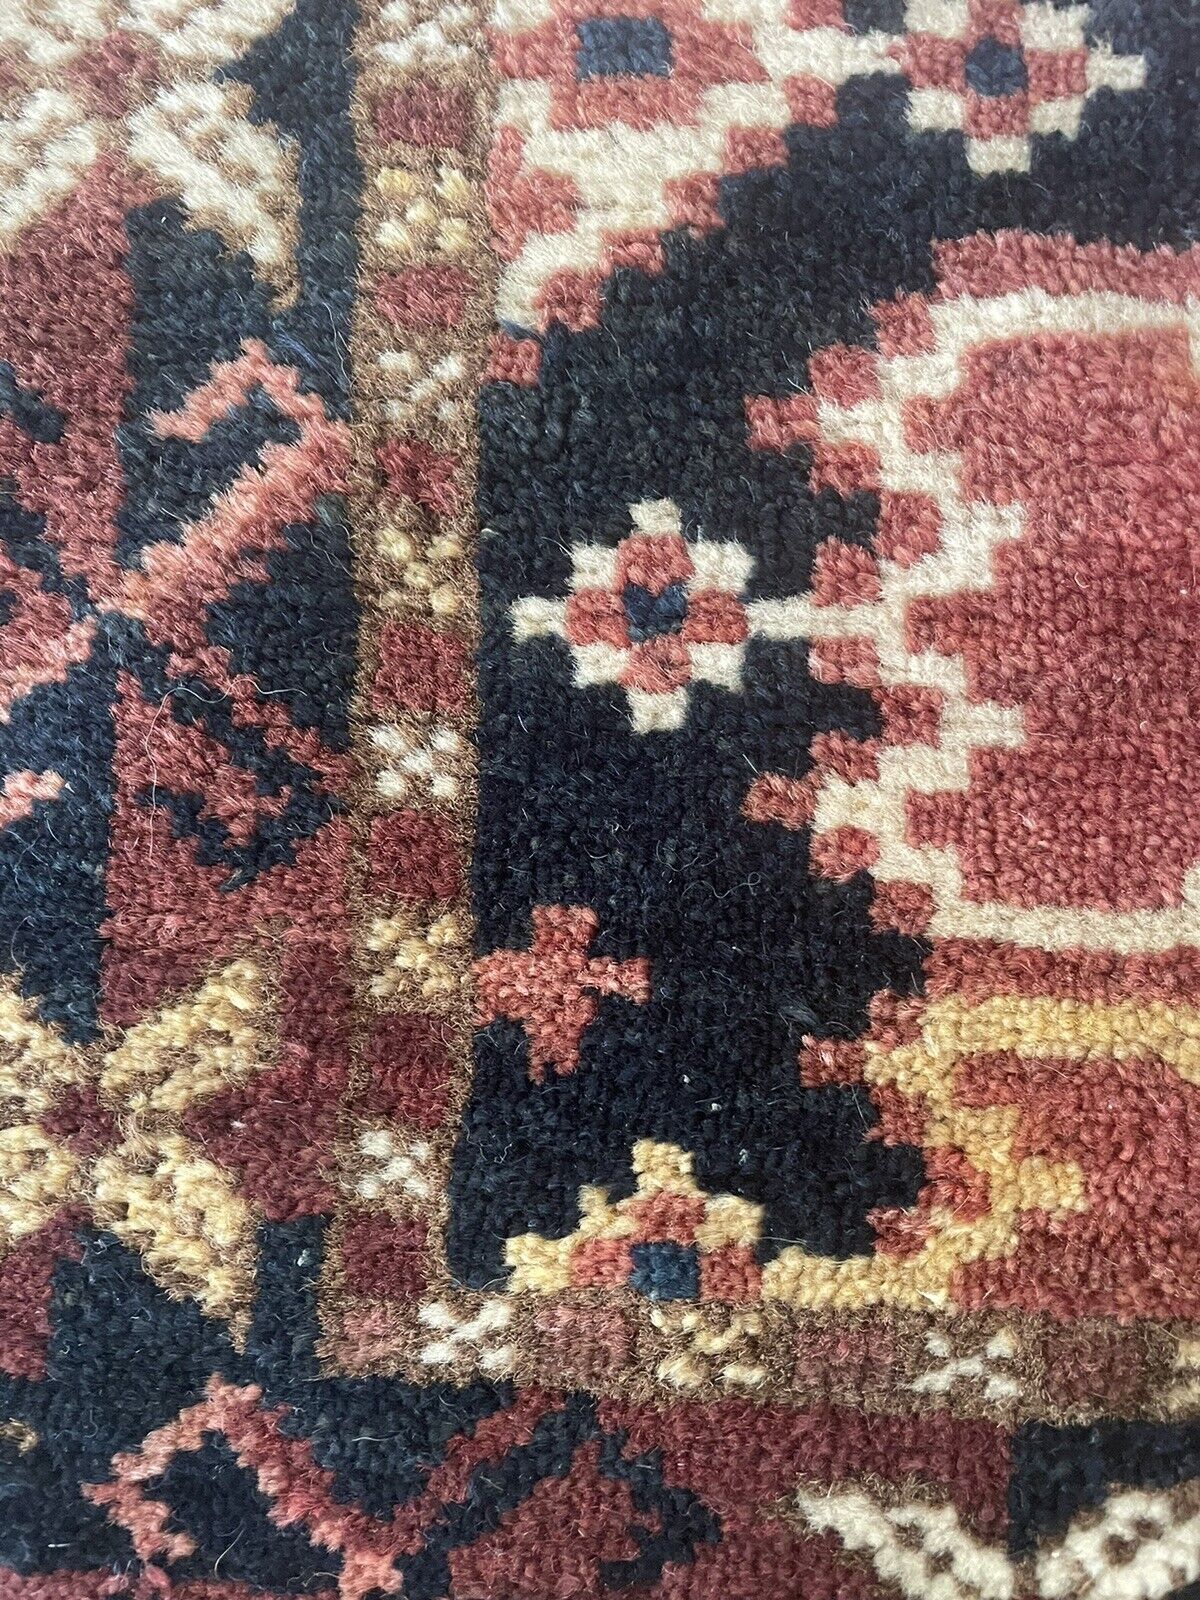 Close-up of character on Handmade Antique Afghan Beshir Collectible Chuval Rug - Detailed view showcasing the rug's character and charm, shaped by its age wear and unique design.